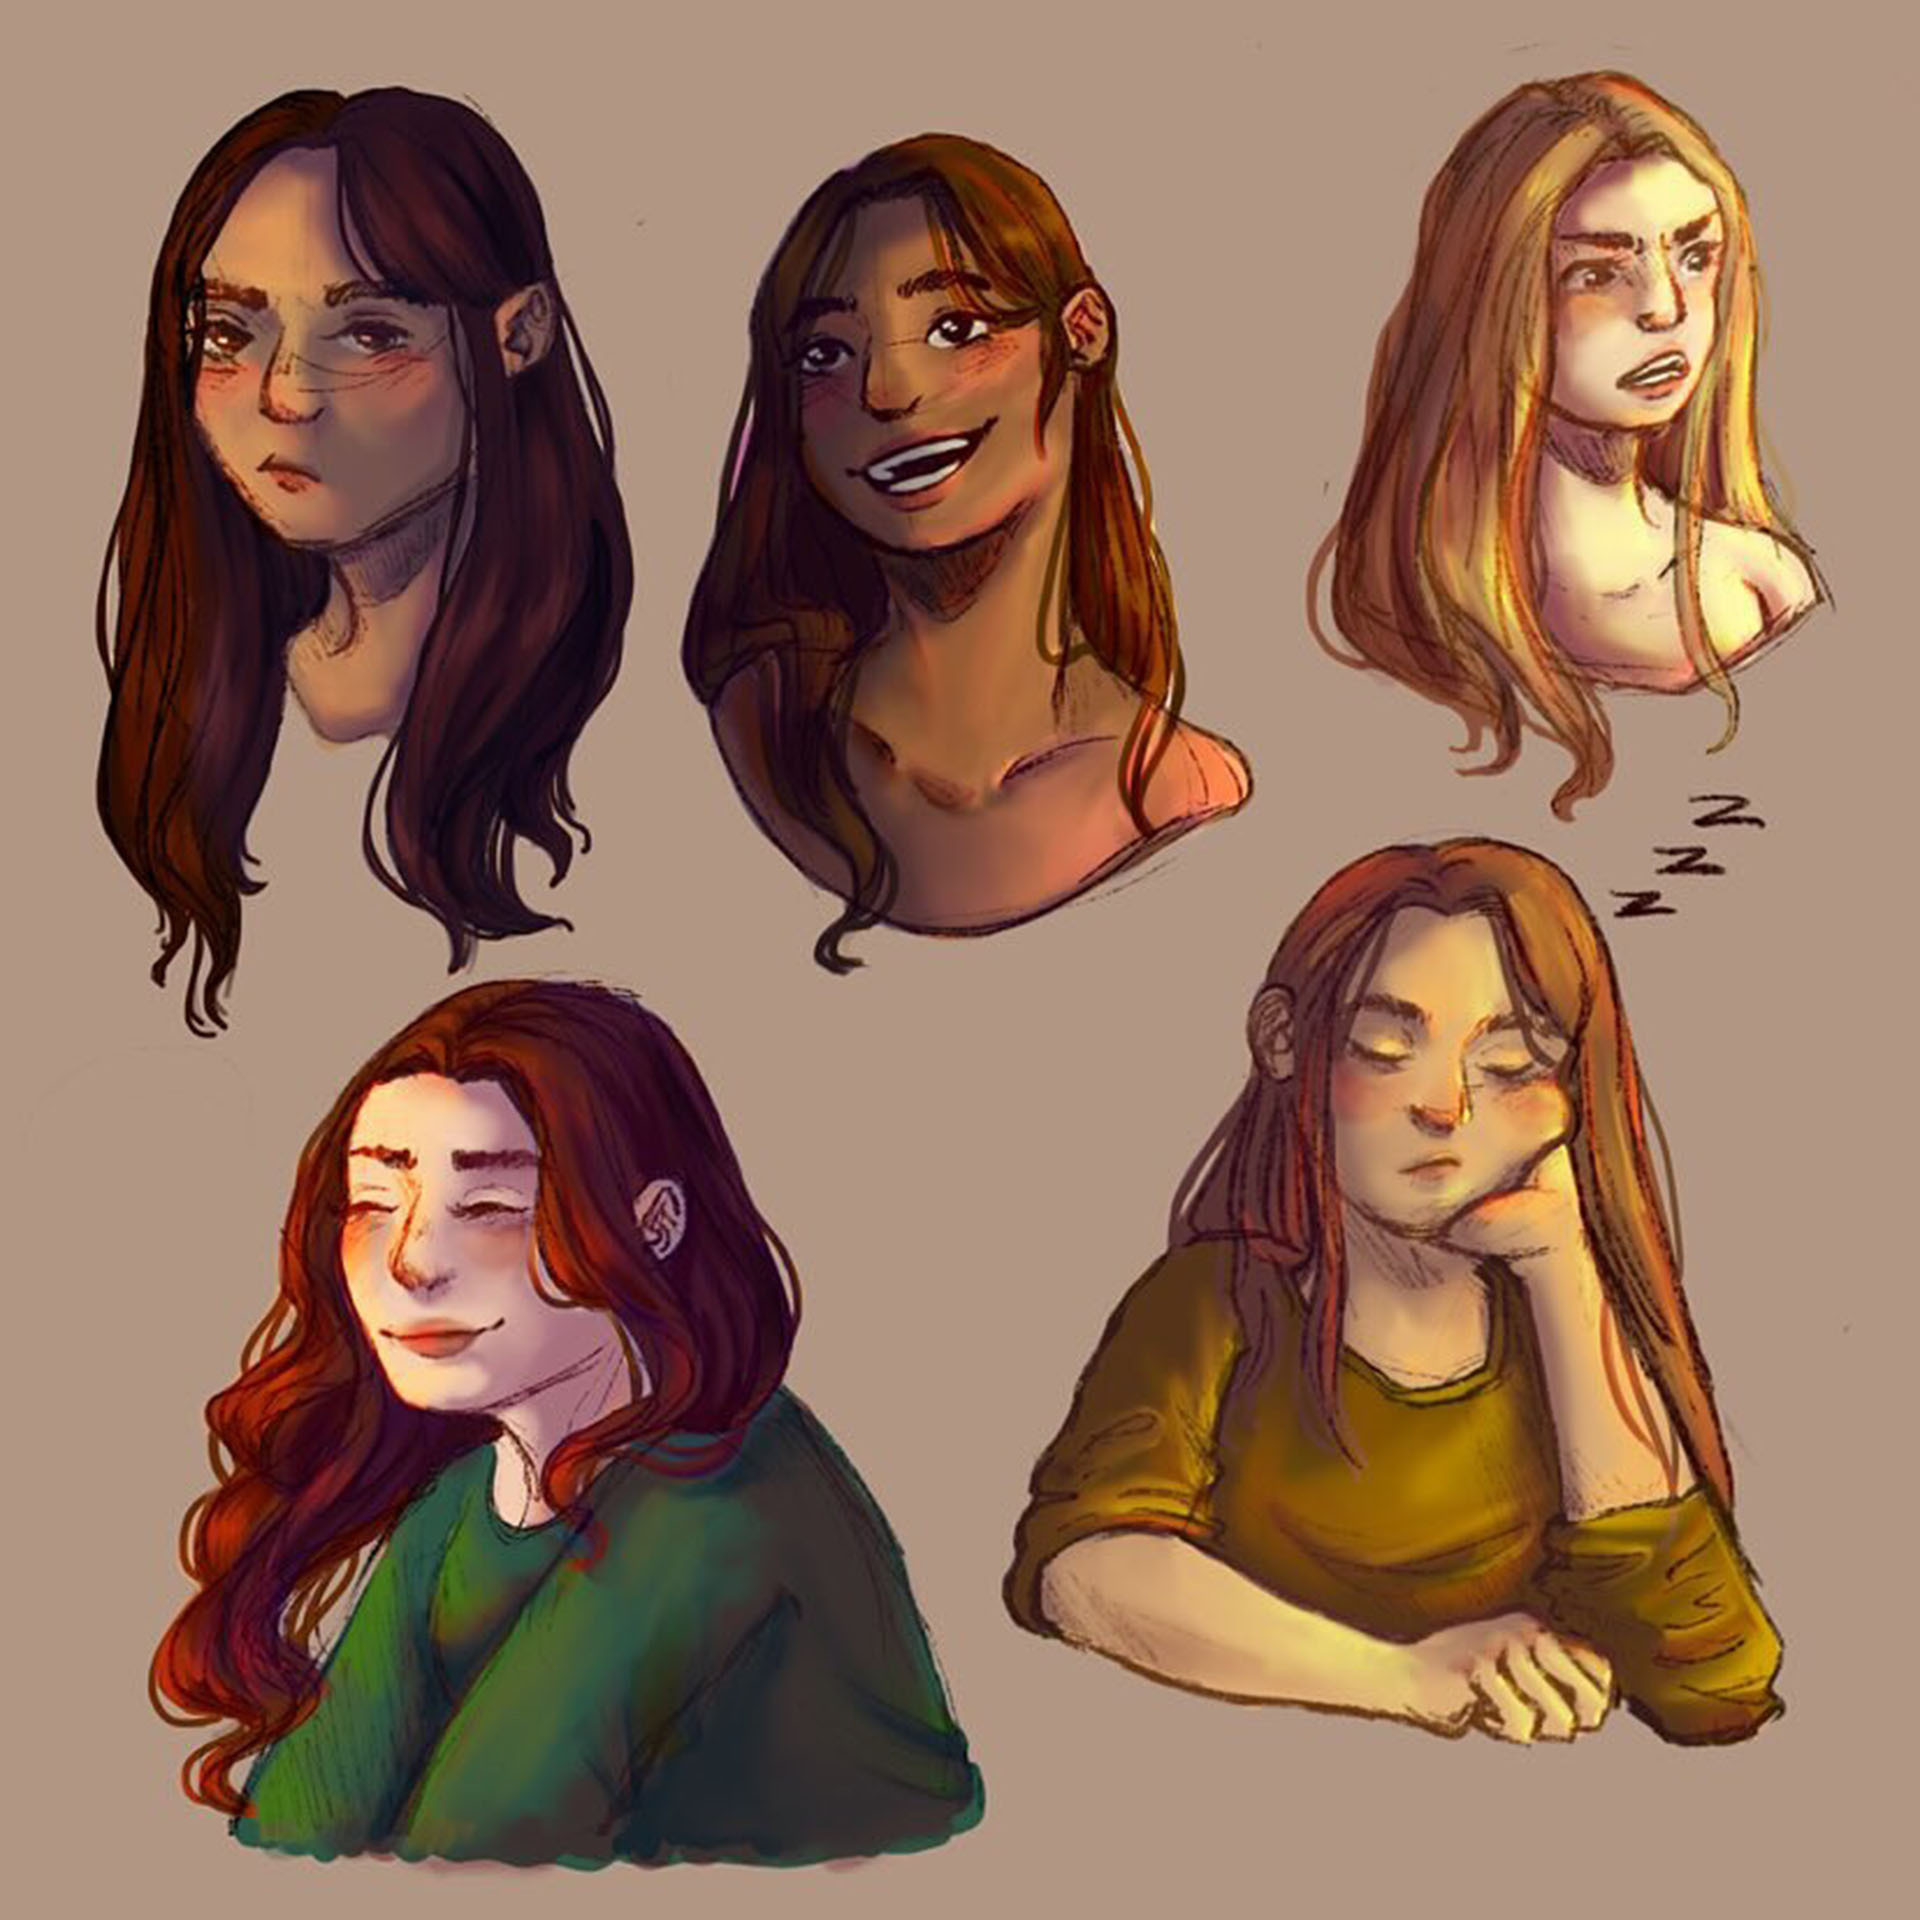 Color sketches of five young women showing various emotions — annoyed, dozing off, etc.